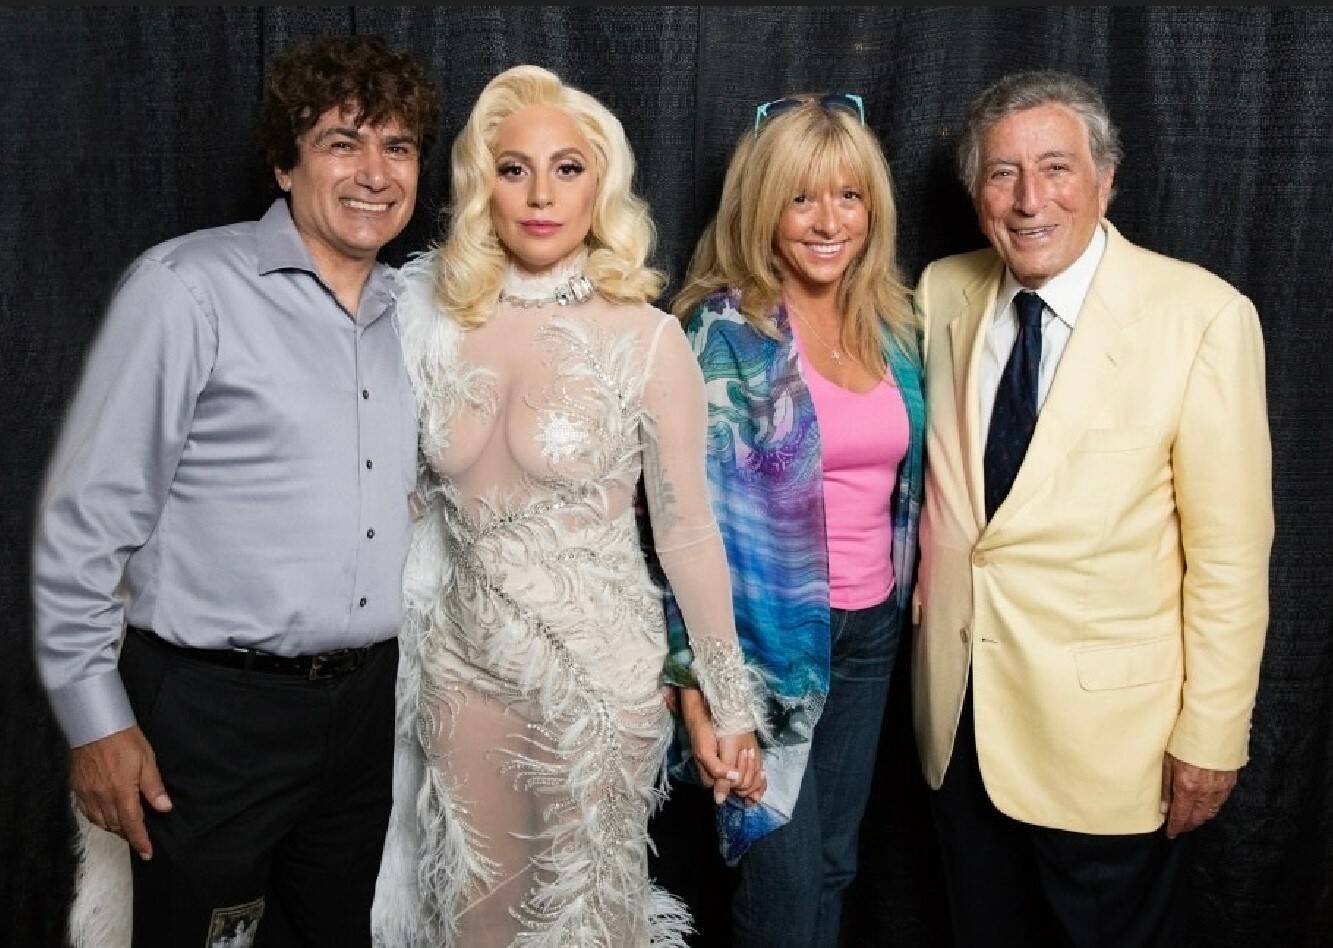 Left to right: ChaChi Loprette, Lady Gaga, ChaChi's wife Stephanie and Tony Bennett. (Courtesy ChaChi Loprette)